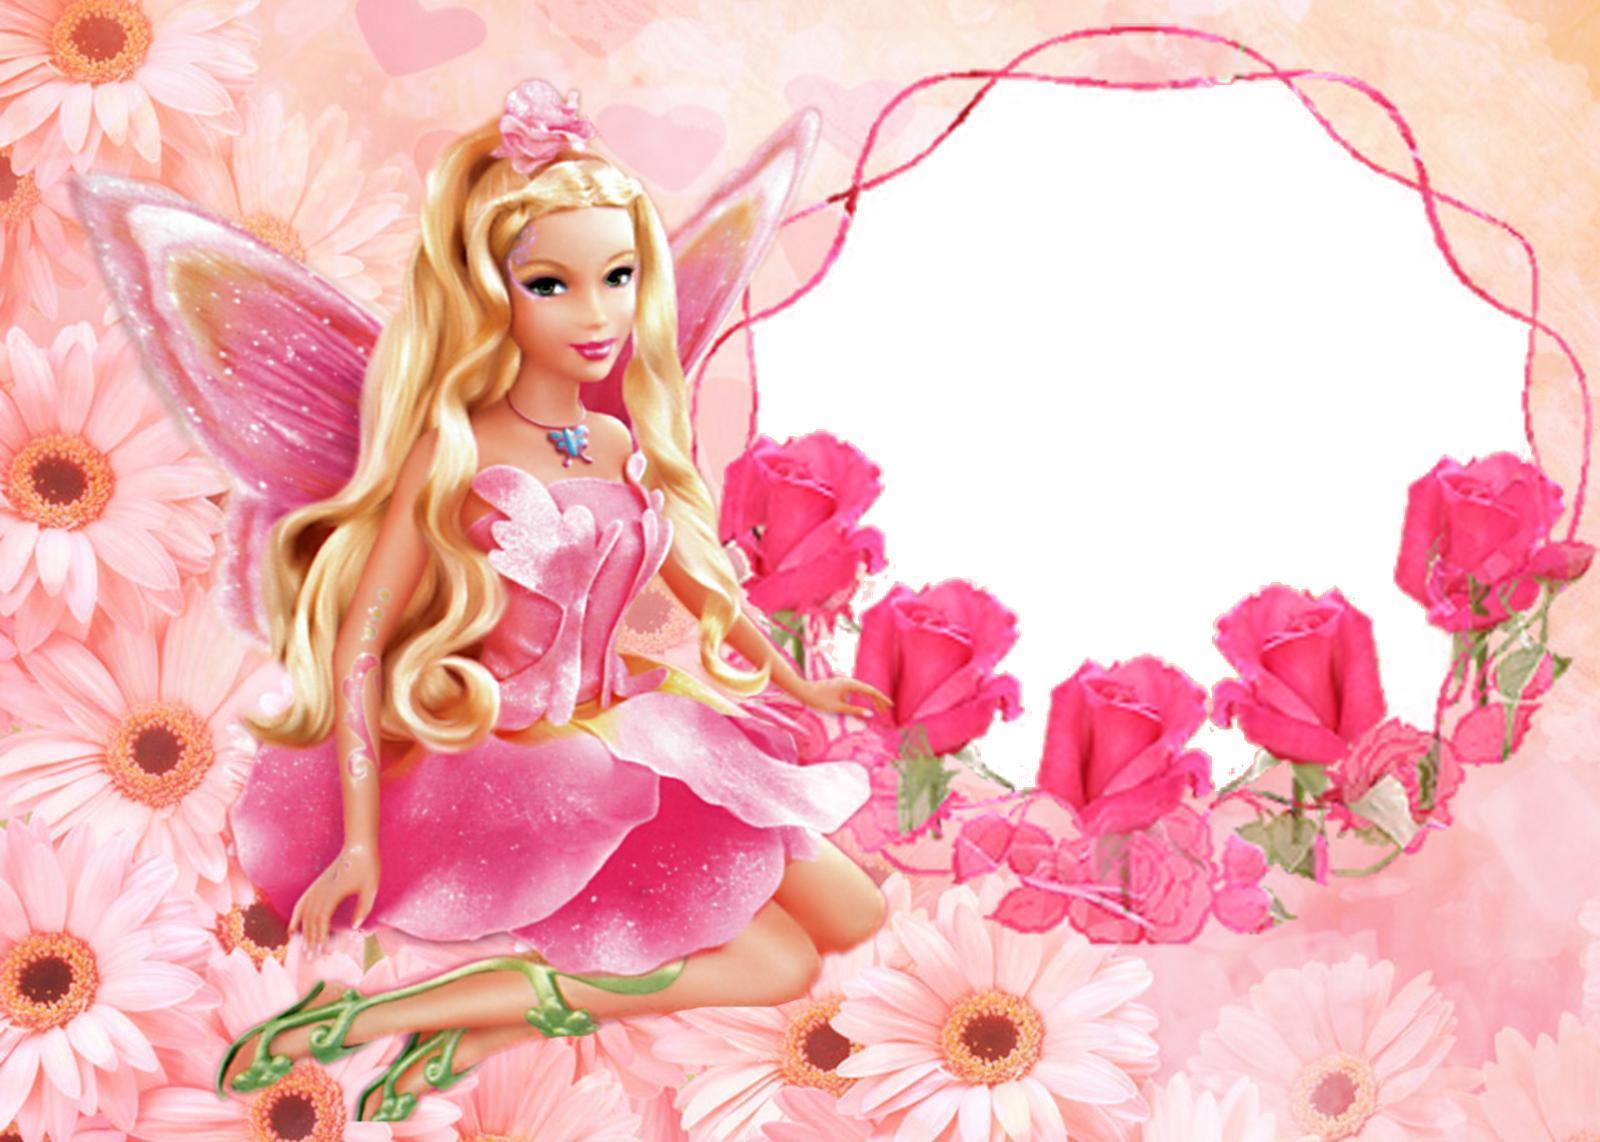 Latest Wallpapers Of Barbie On 2016 - Wallpaper Cave